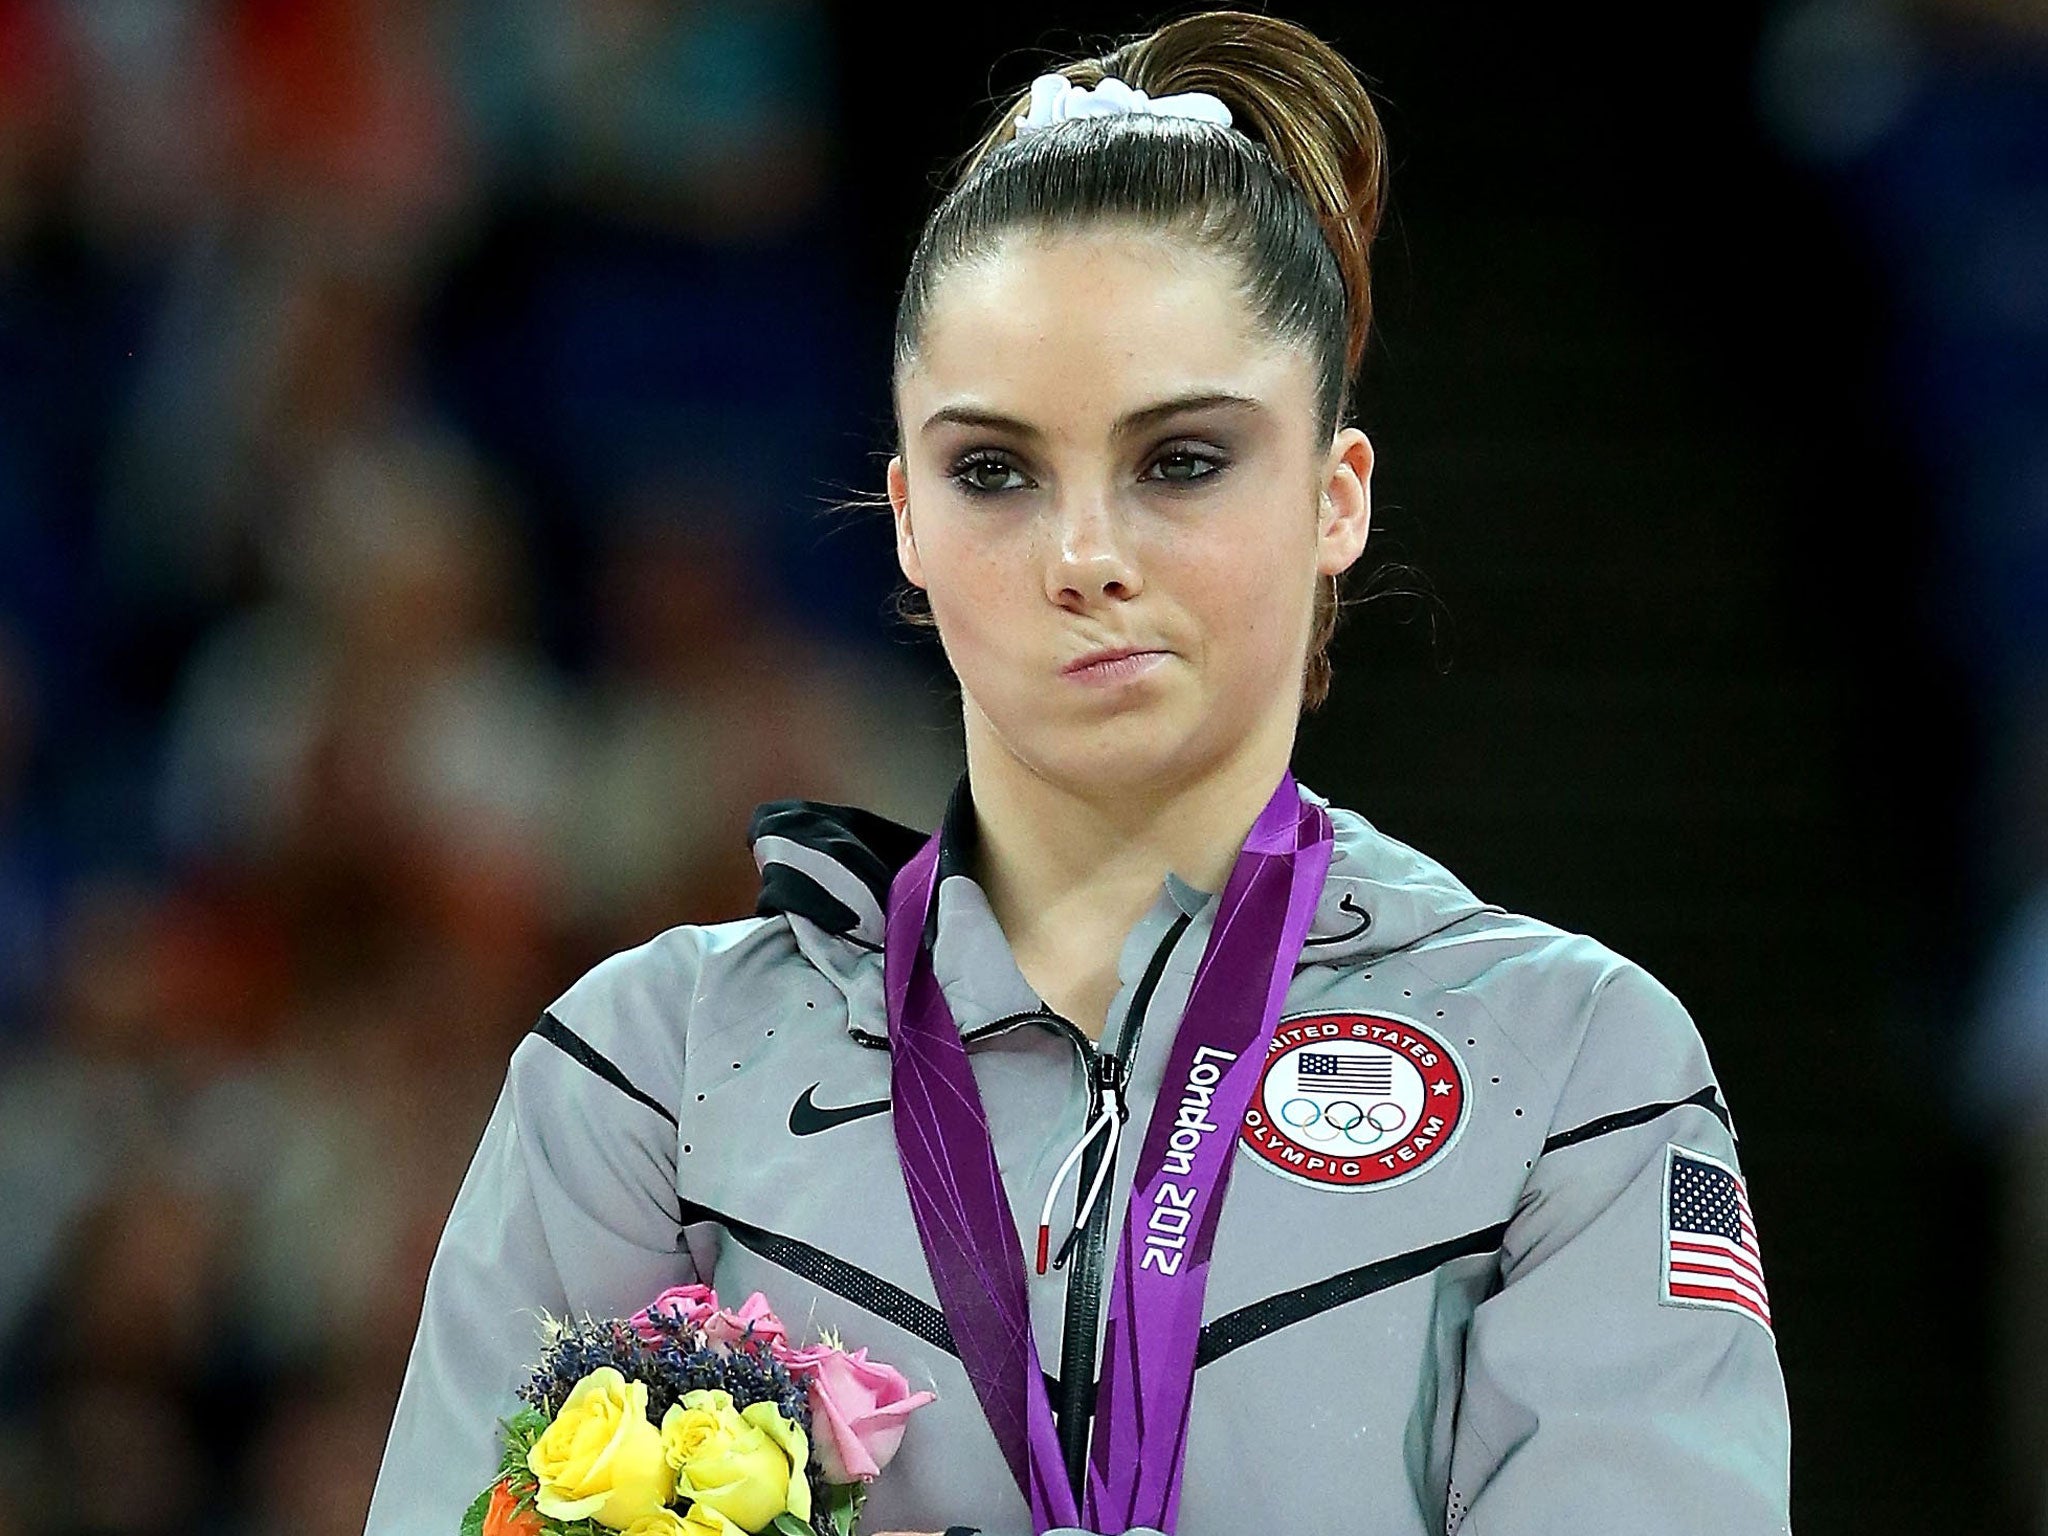 McKayla Maroney competed in the London 2012 Olympics